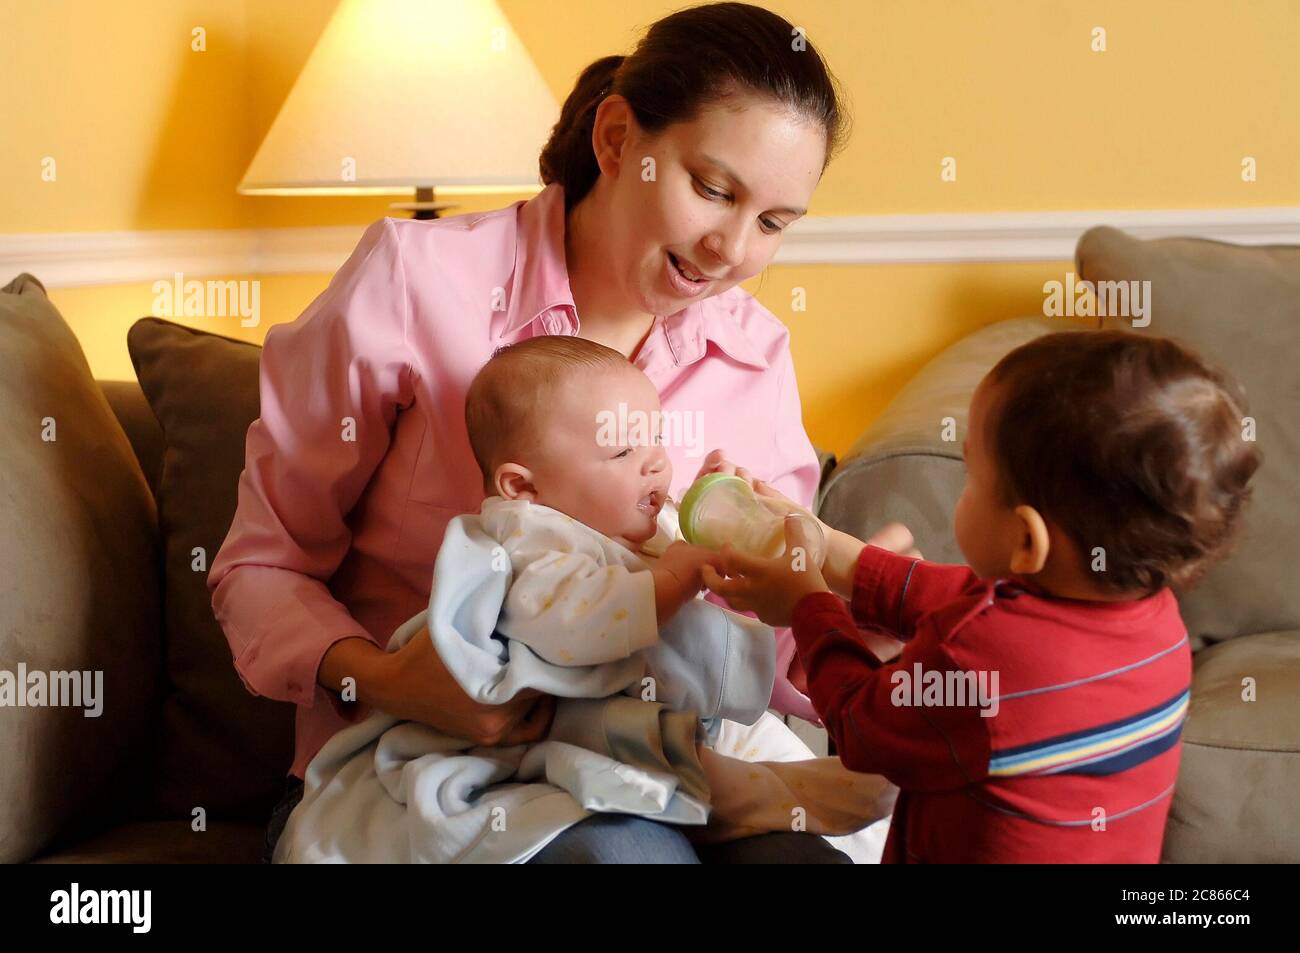 Austin, Texas USA, January 2006: Hispanic mom, early 30's, holds her three-month old newborn while 22-month old brother tries feeding with a bottle at home.  MR   ©Bob Daemmrich Stock Photo